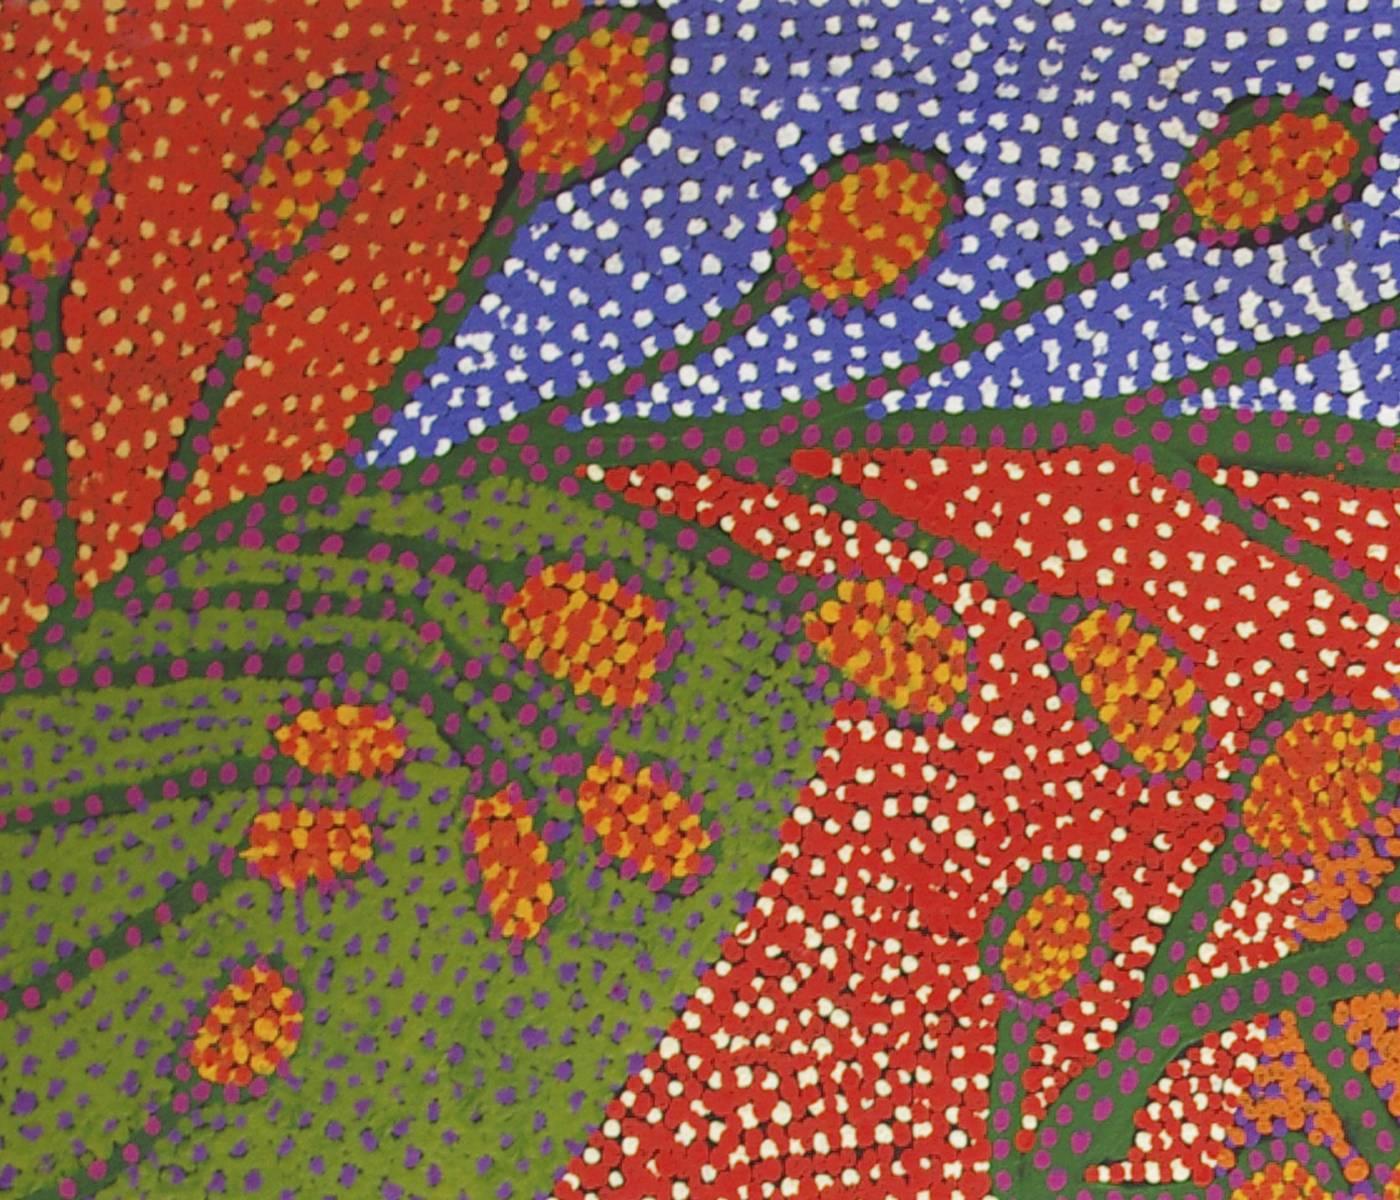 Ruby Tjangawa Williamson (d. 2014) is one of Australia's most sought-after Aboriginal artists. She was one of the founding artists of Tjala Arts (formerly Minymaku Arts, meaning “women’s art”). Due to her captivating work and endearing personality,